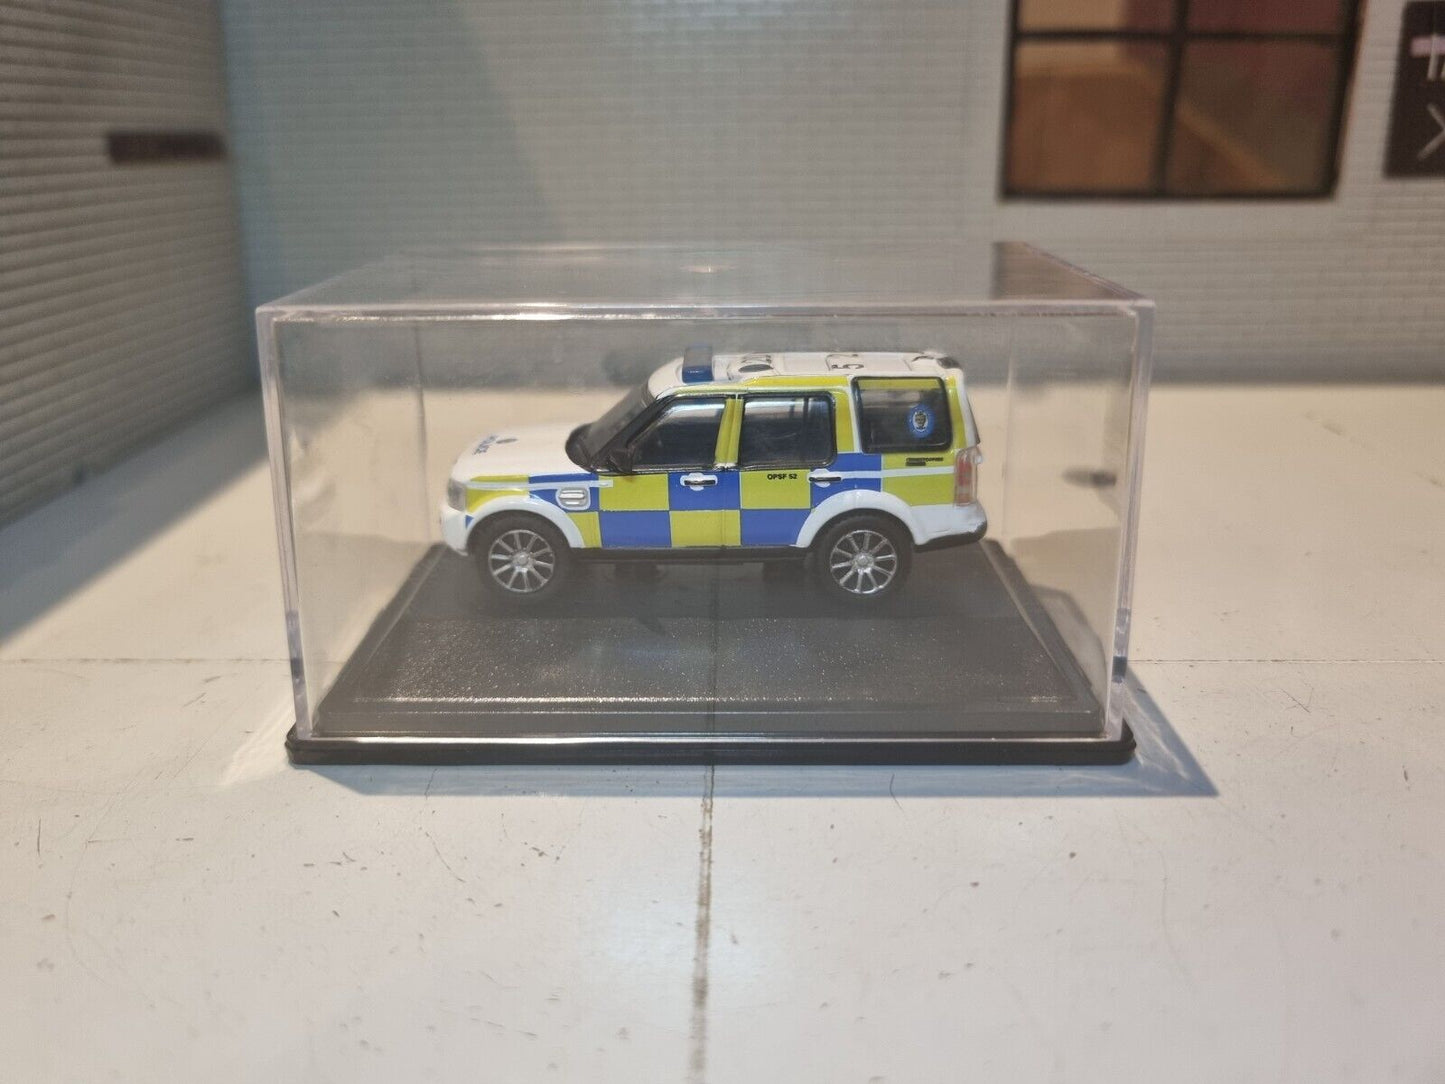 Land Rover Discovery 4 West Midlands Police 76DIS006 Oxford Druckguss 1:76